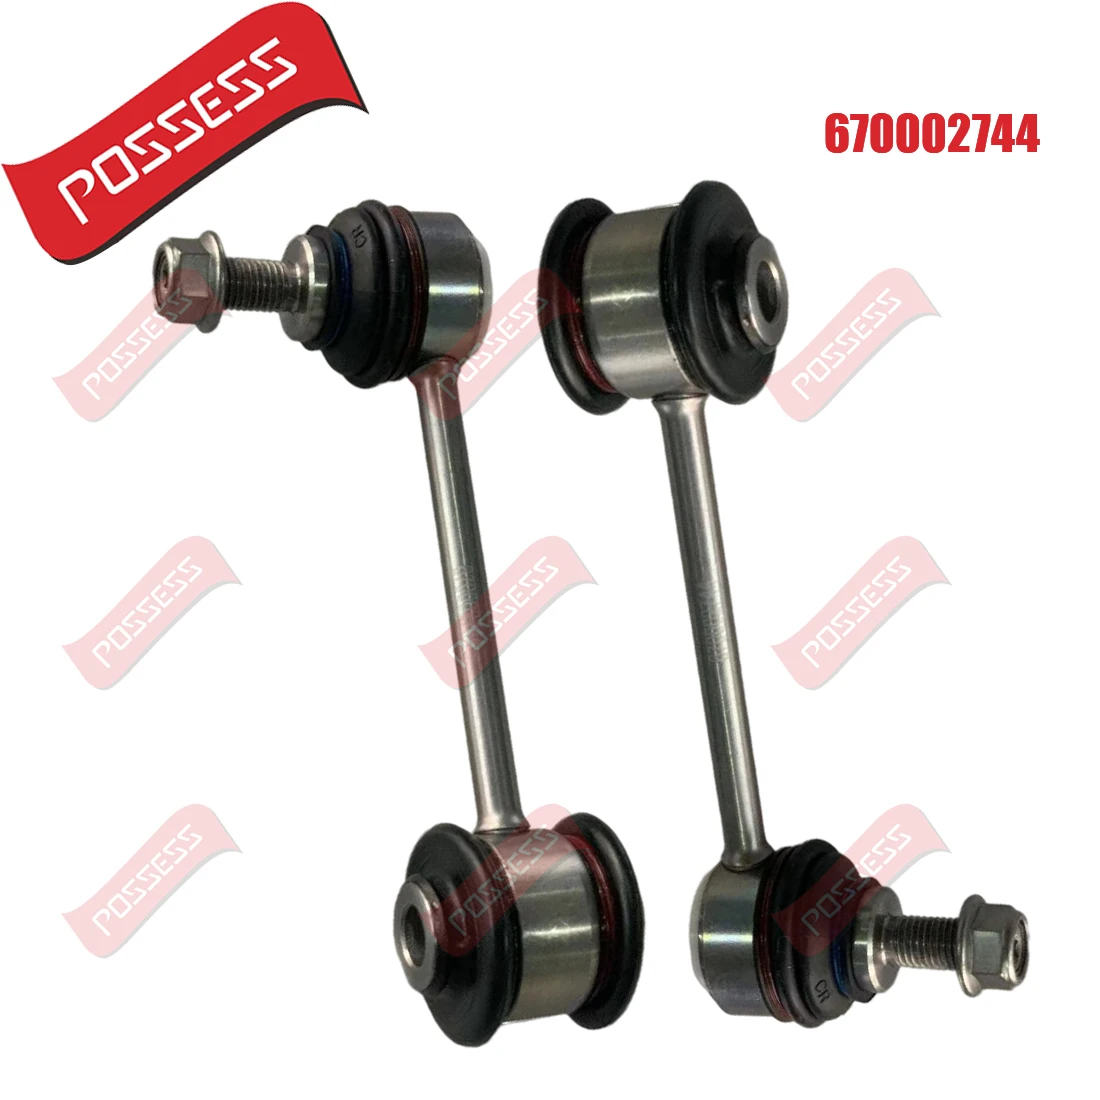 

A Pair of Rear Axle Sway Bar End Stabilizer Link Ball Joint For Maserati Quattroporte M156 Ghibli M157， OE 670002744 ,L=R